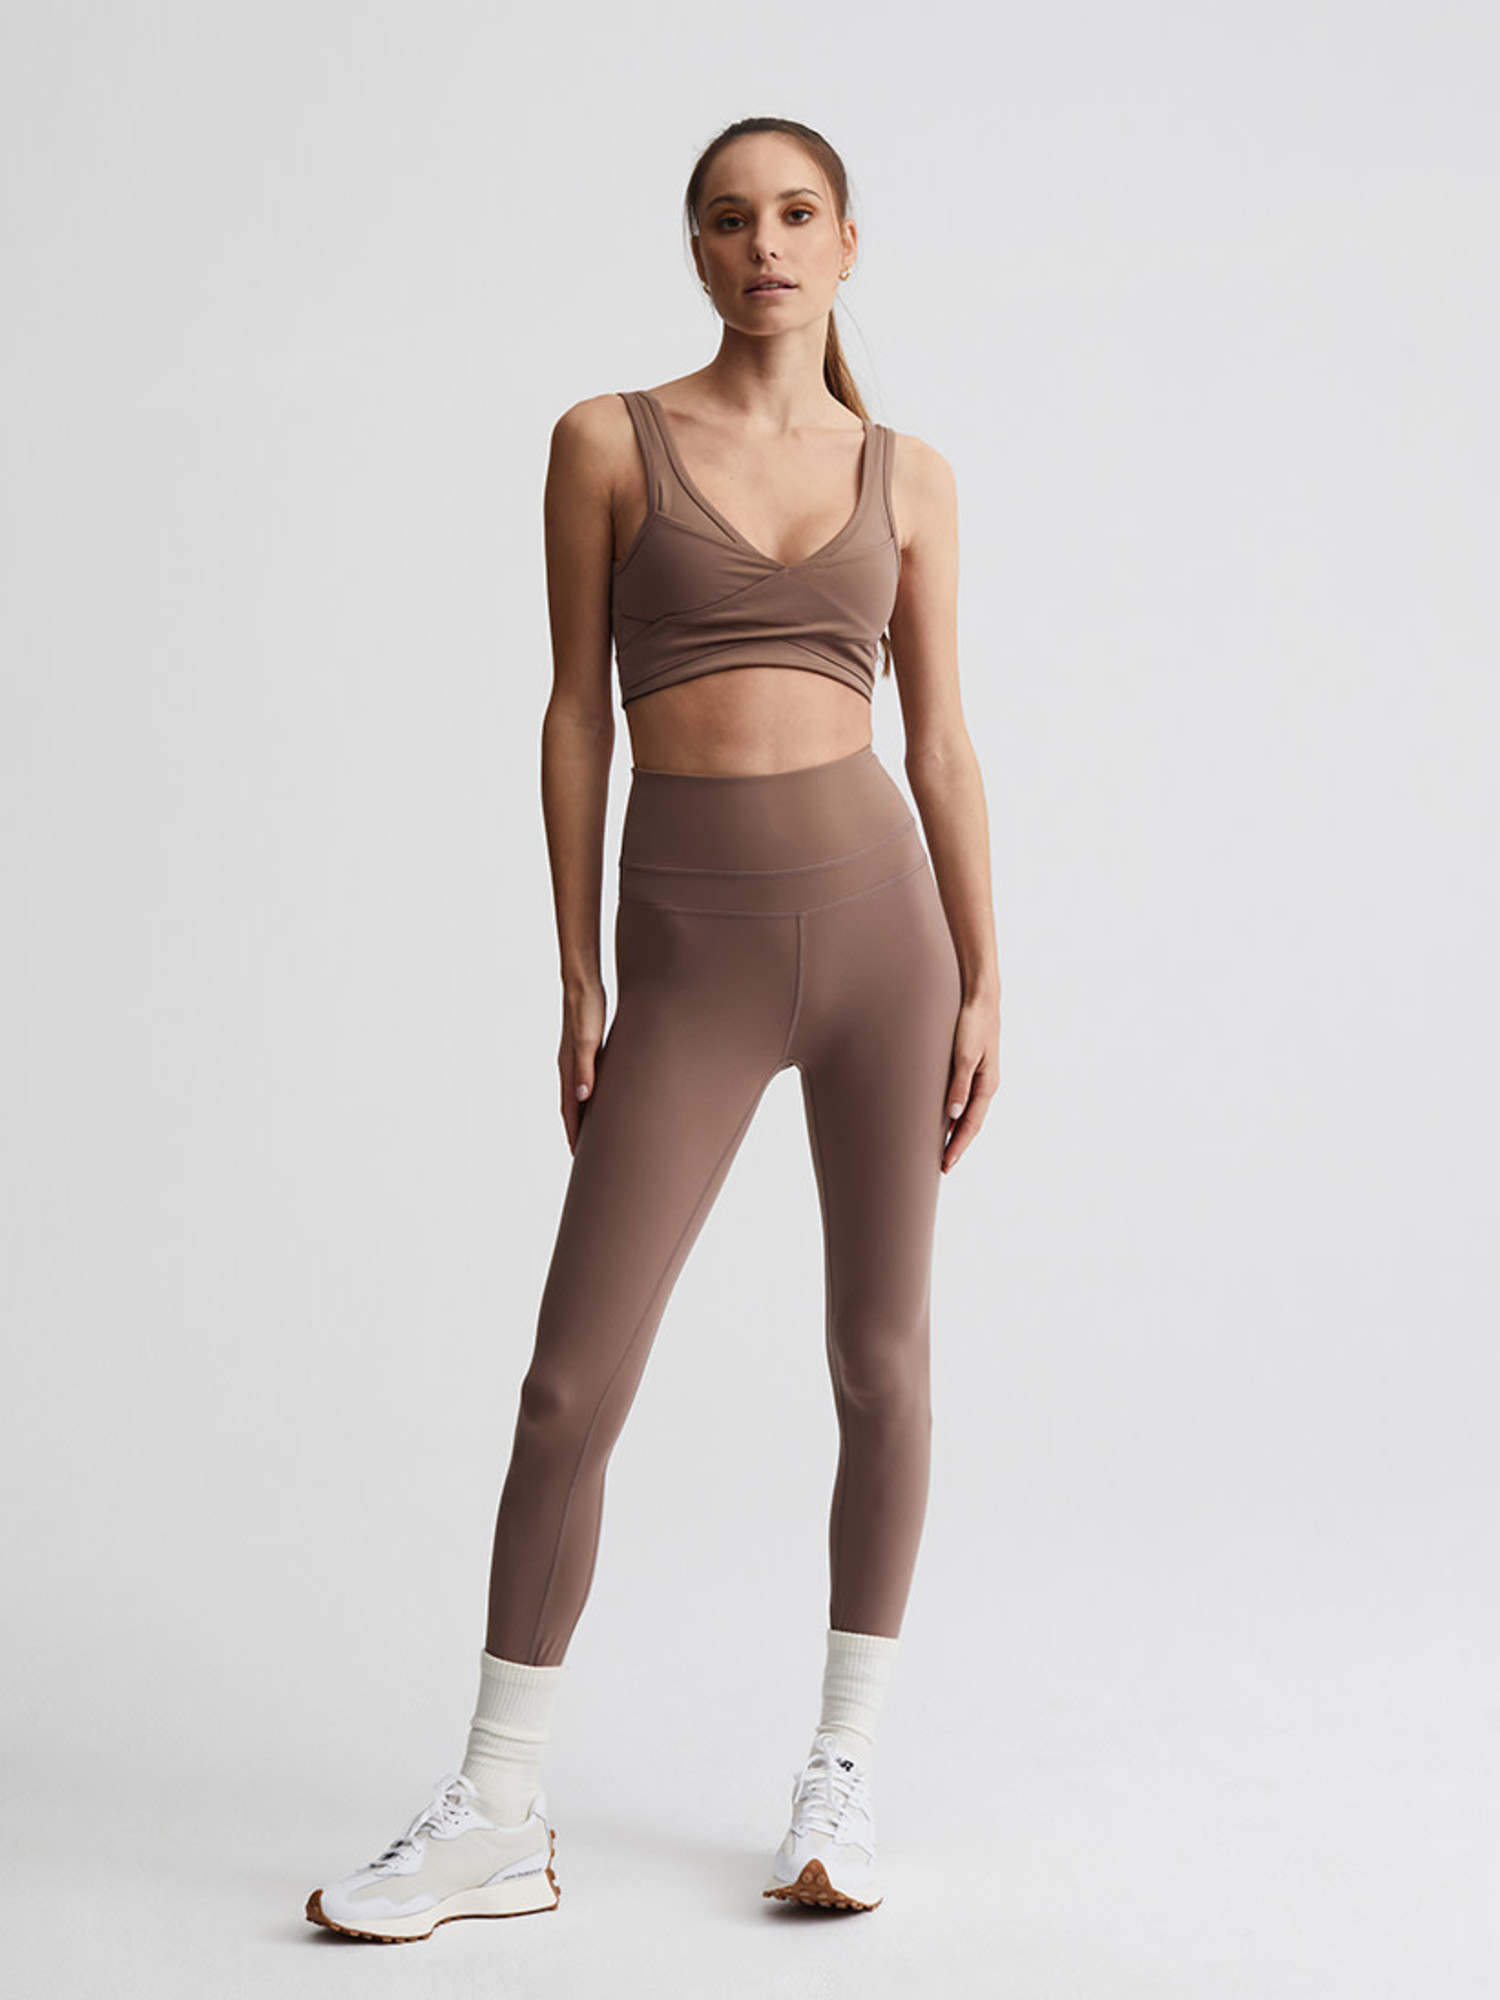 VARLEY Clothing, Women's Activewear, Sportswear, Gym and Yoga Clothes